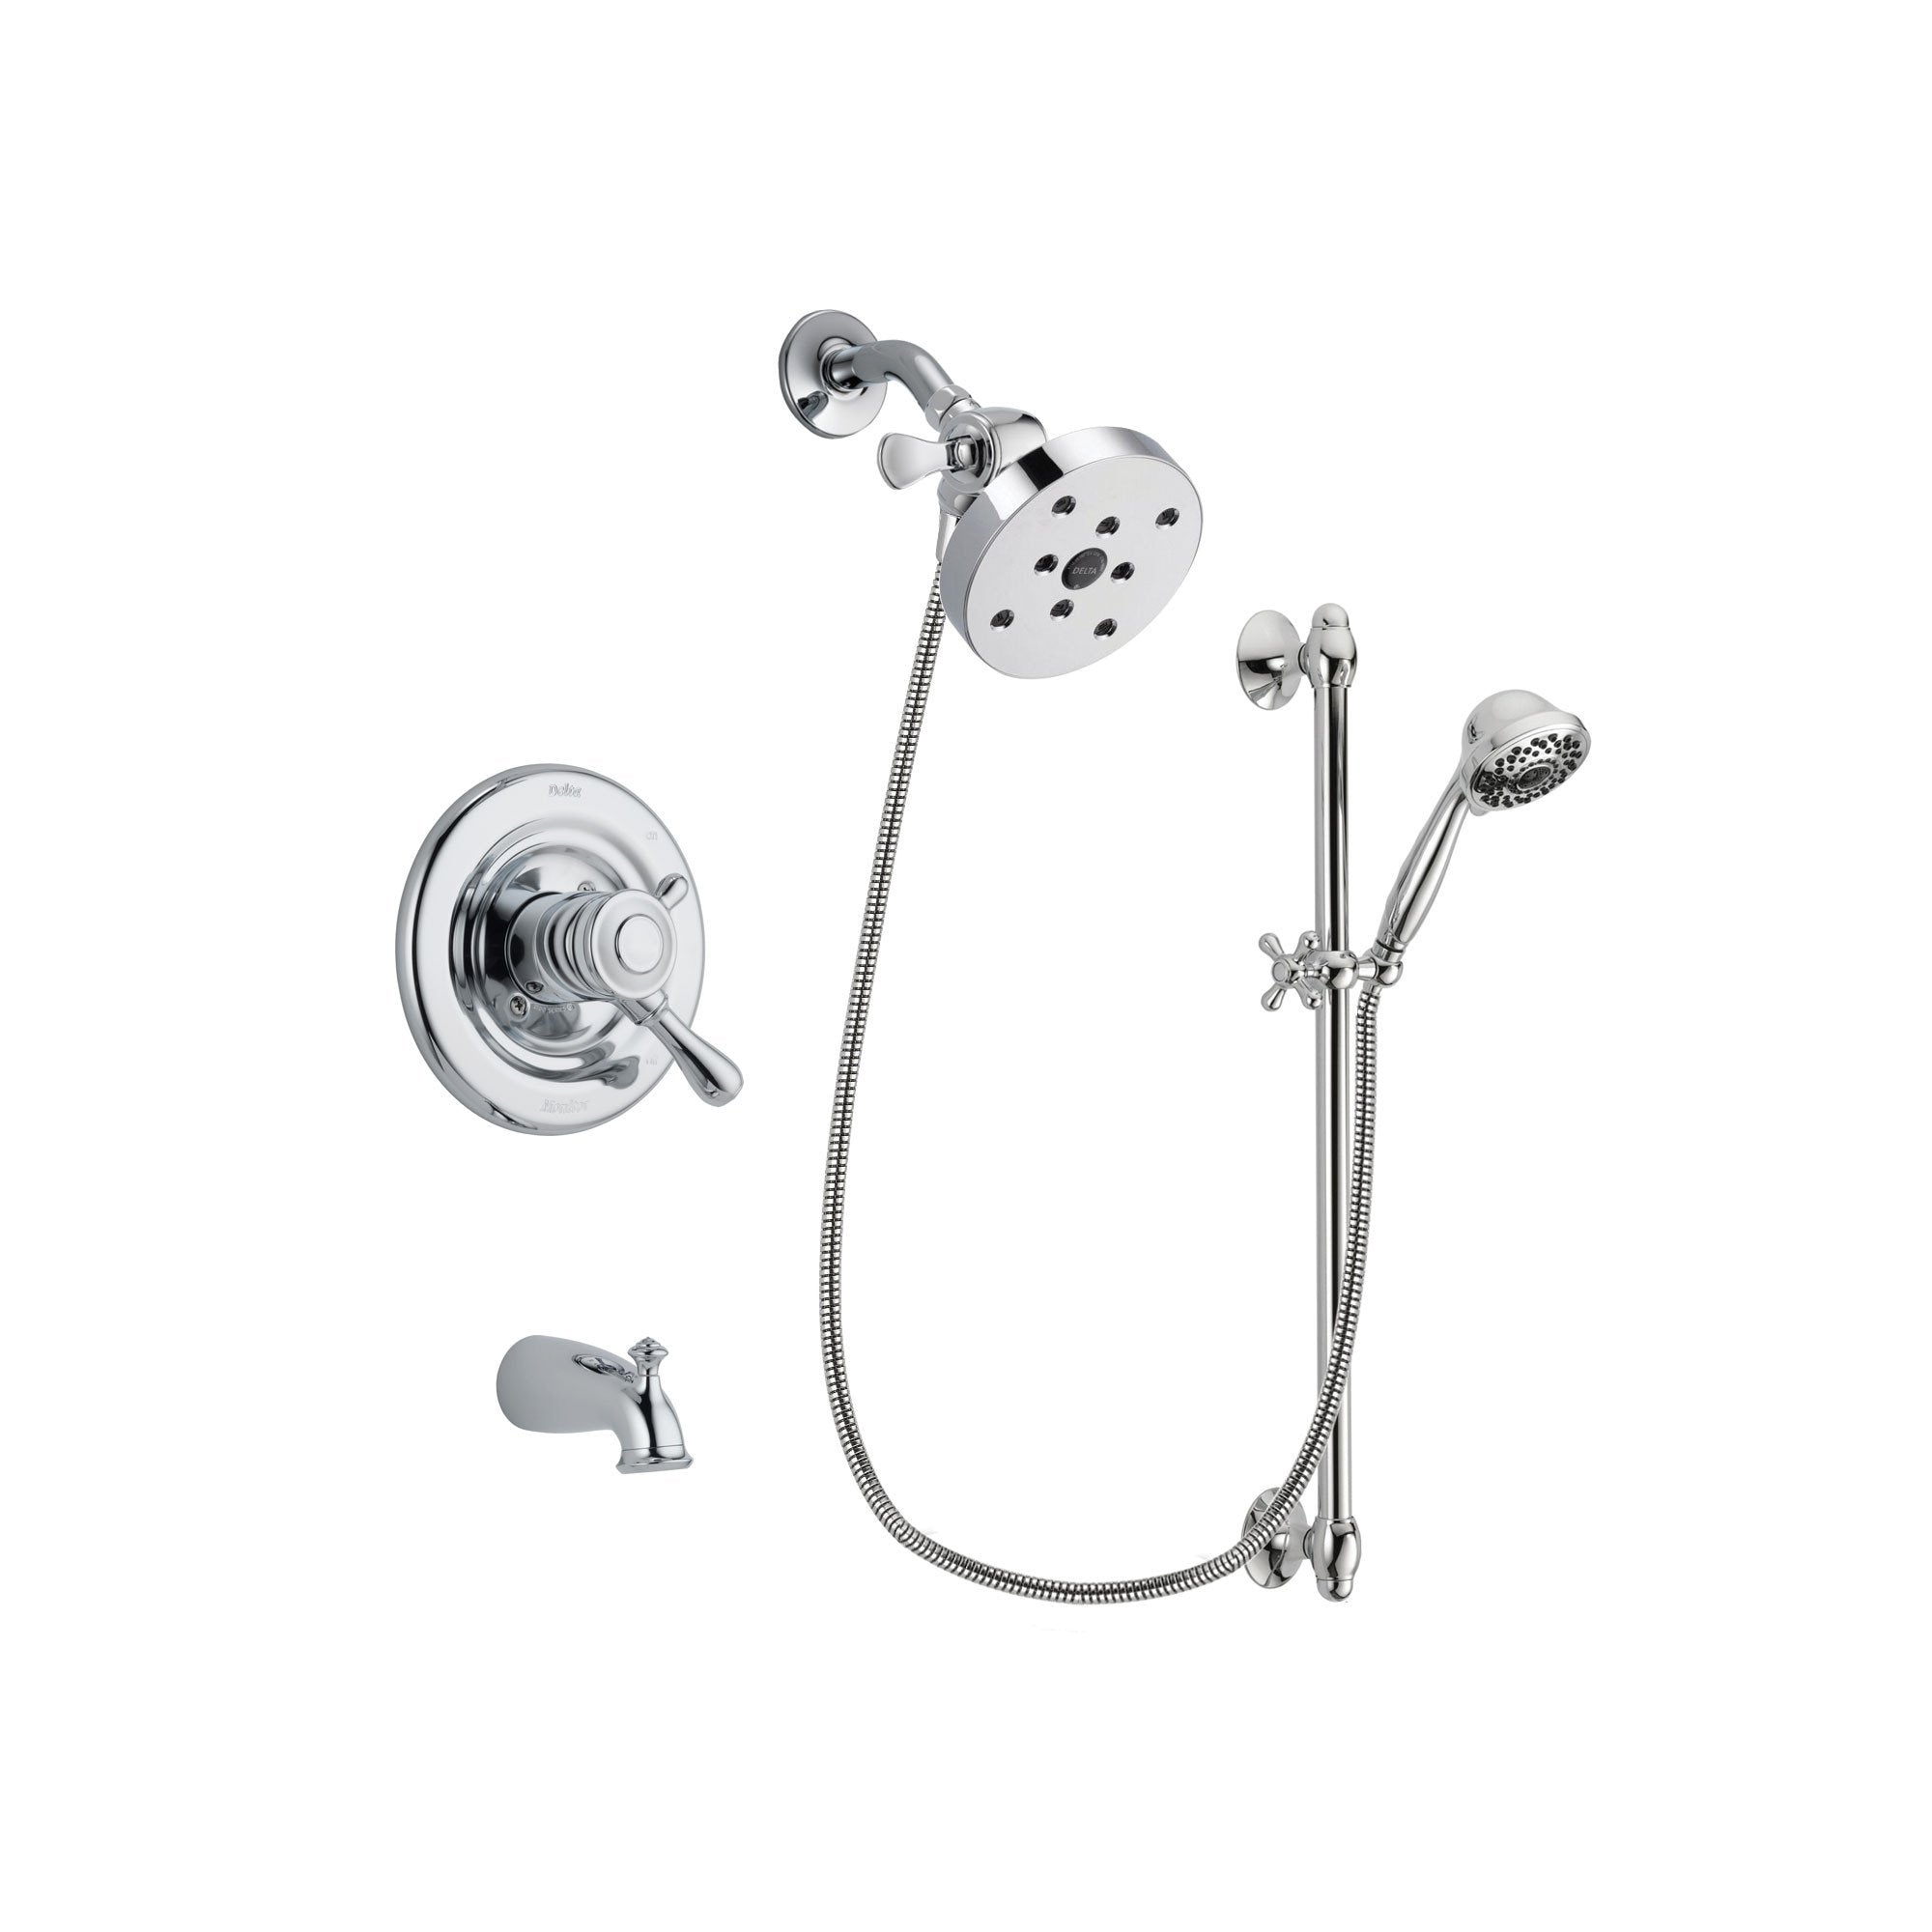 Delta Leland Chrome Finish Dual Control Tub and Shower Faucet System Package with 5-1/2 inch Shower Head and 7-Spray Handheld Shower Sprayer with Slide Bar Includes Rough-in Valve and Tub Spout DSP0689V